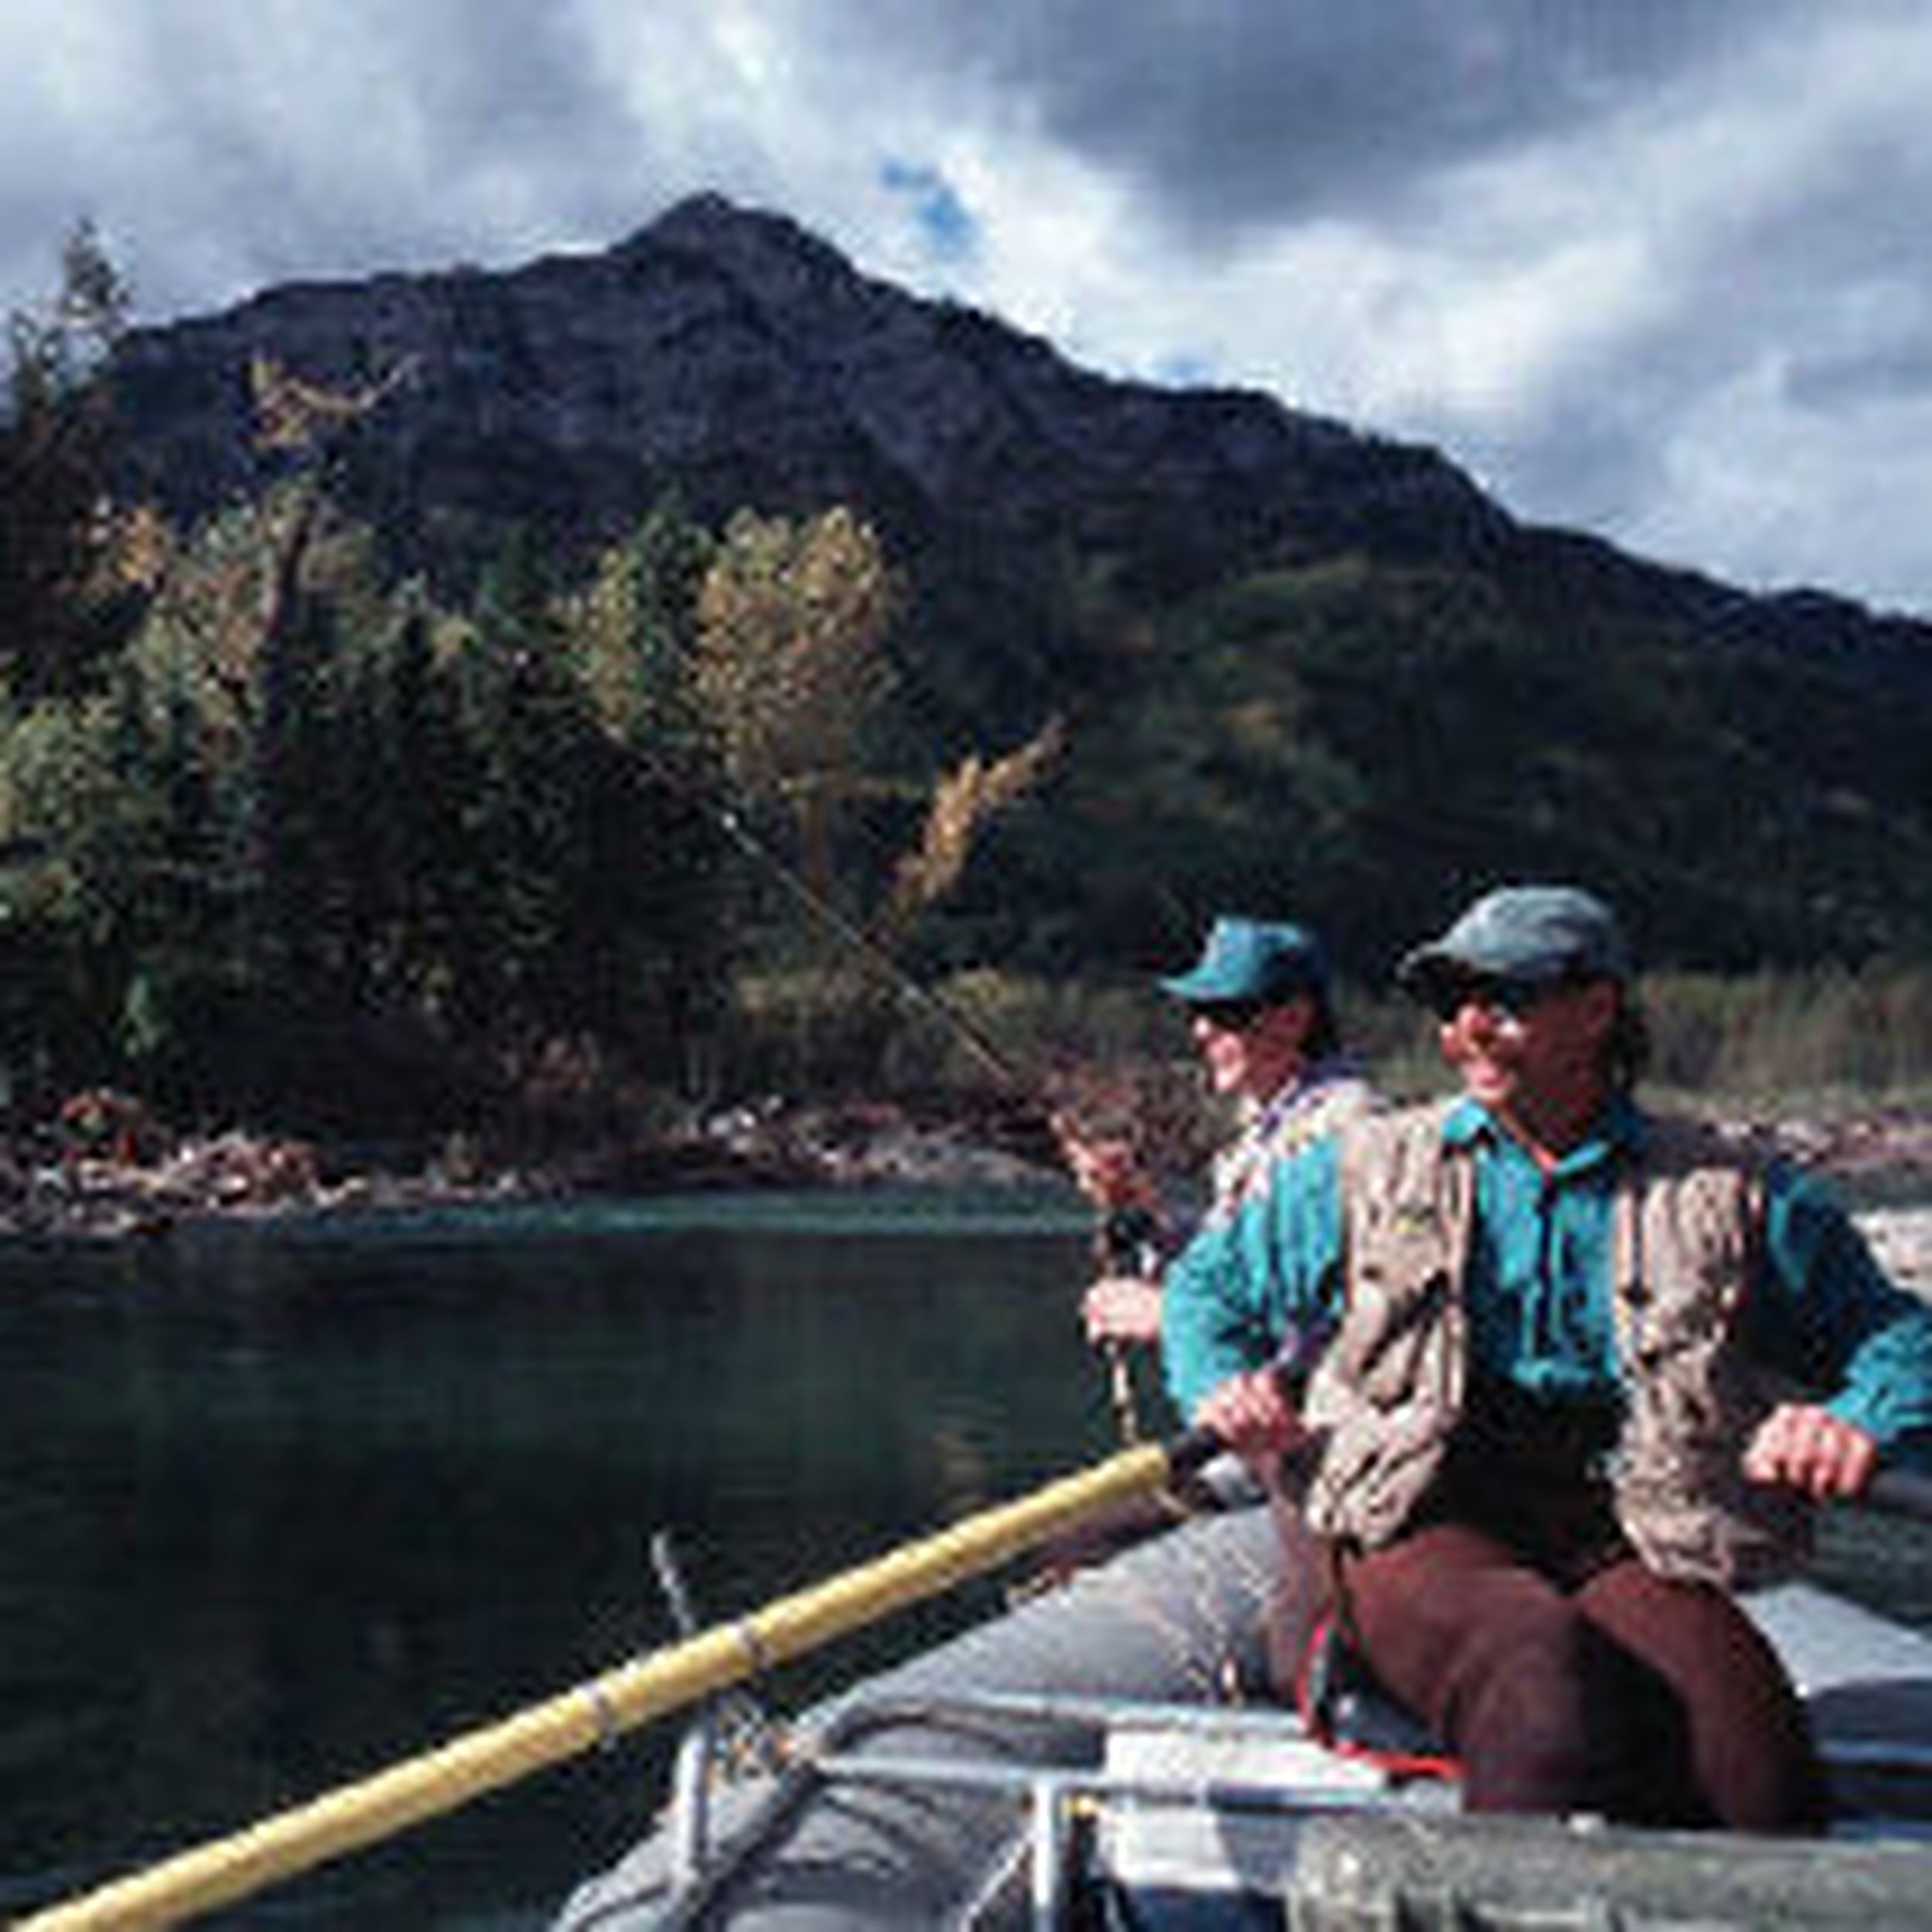 B.C. rivers are coming prime for anglers